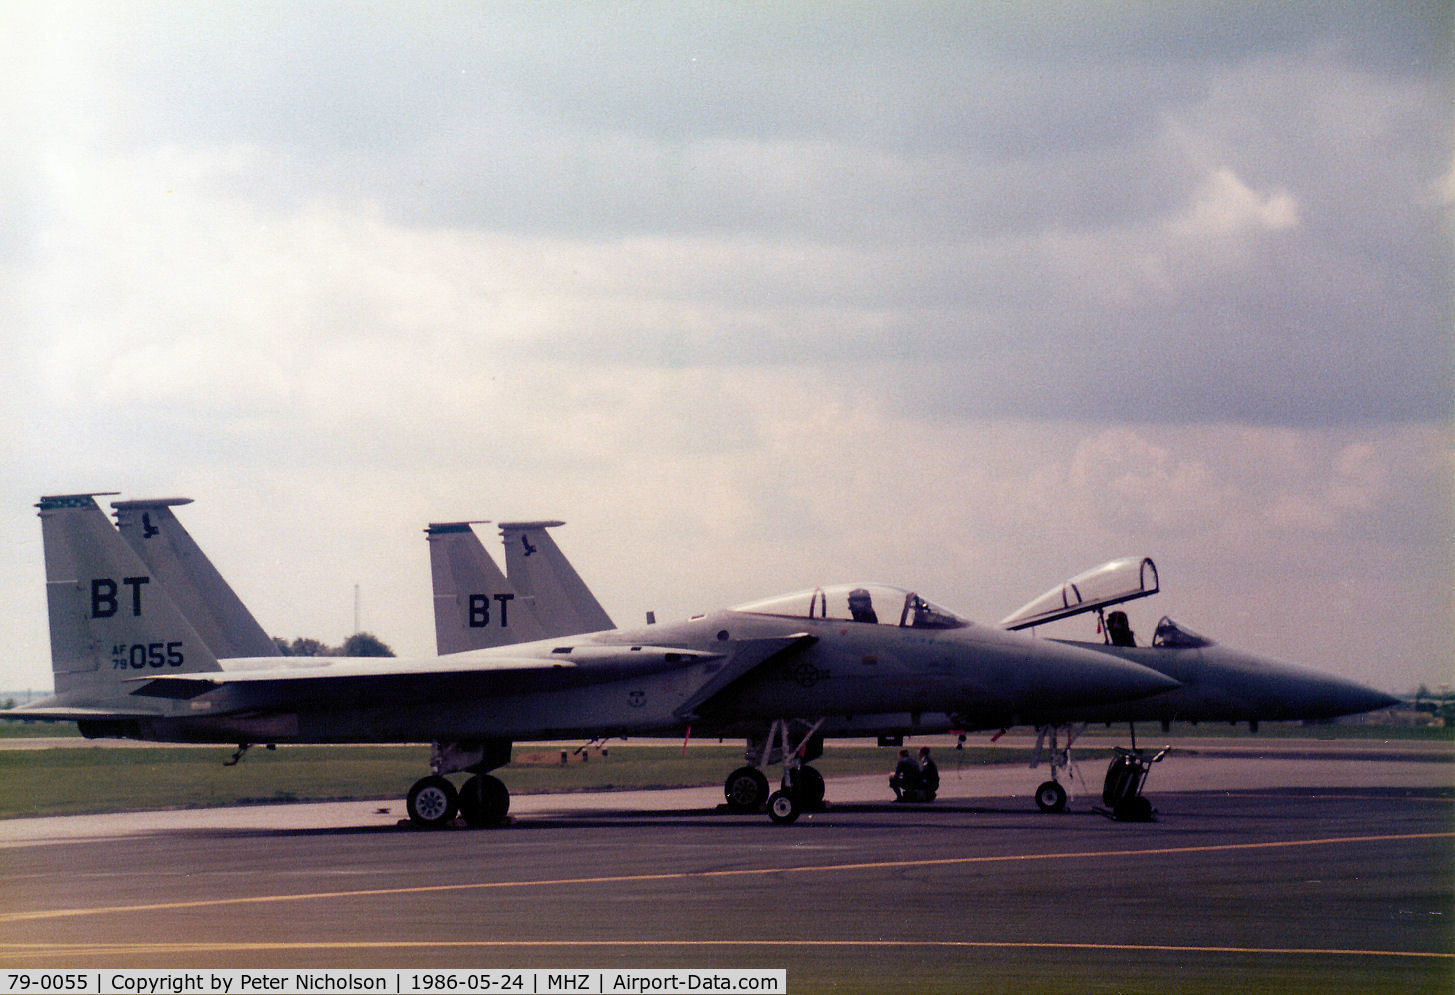 79-0055, 1979 McDonnell Douglas F-15C Eagle C/N 0599/C124, F-15C Eagle of Bitburg's 525th Tactical Fighter Squadron/36th Tactical Fighter Wing on the flight-line at the 1986 RAF Mildenhall Air Fete.